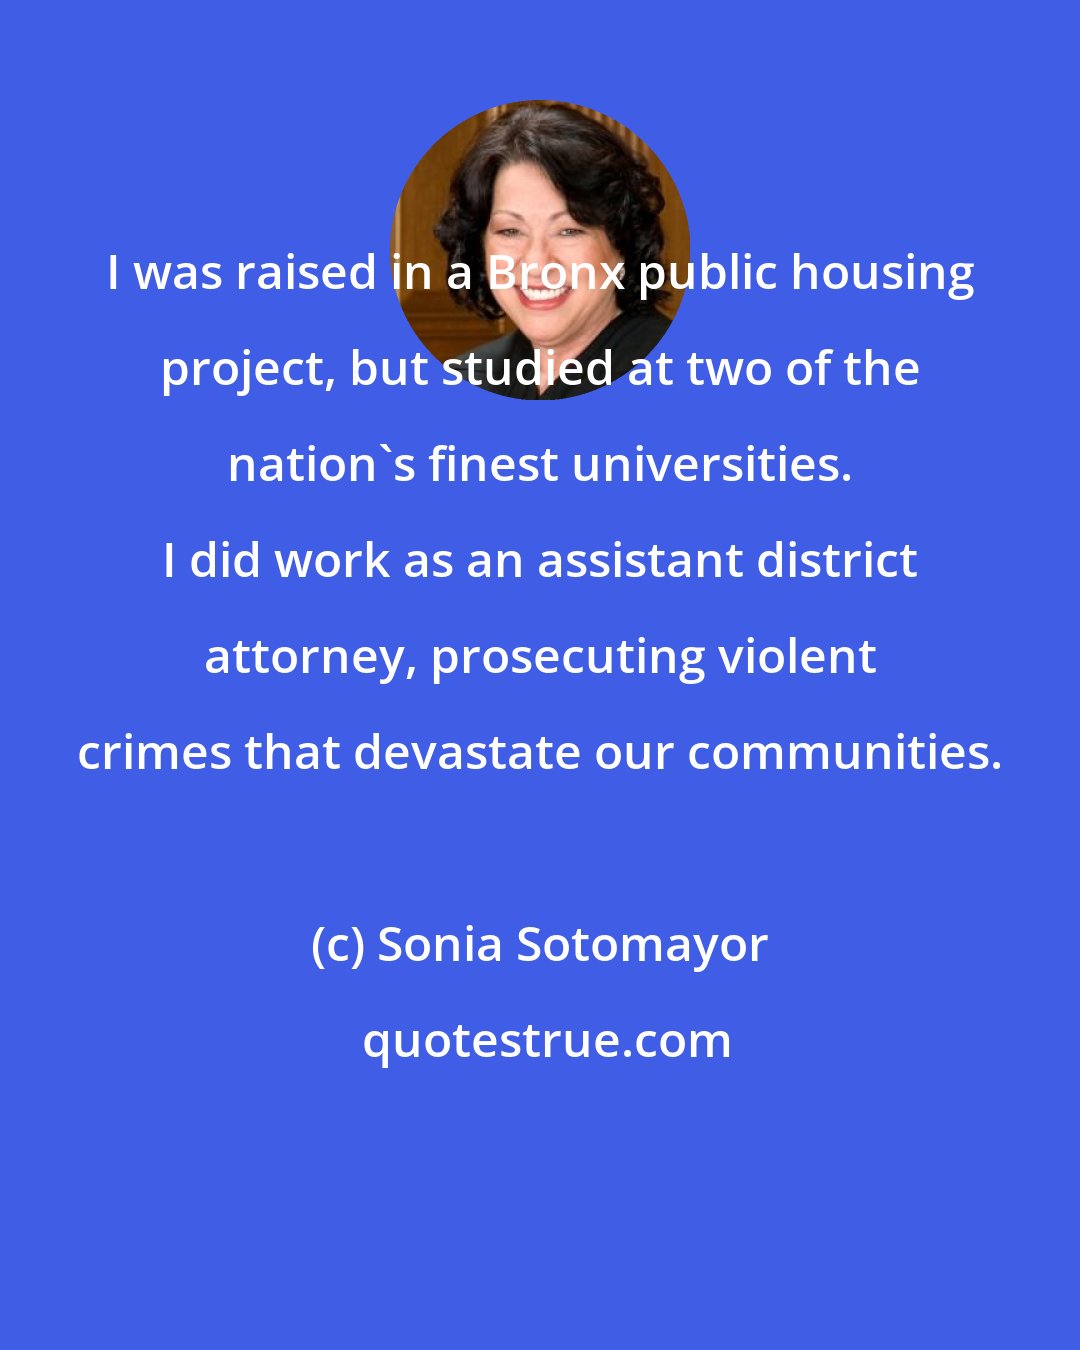 Sonia Sotomayor: I was raised in a Bronx public housing project, but studied at two of the nation's finest universities. I did work as an assistant district attorney, prosecuting violent crimes that devastate our communities.